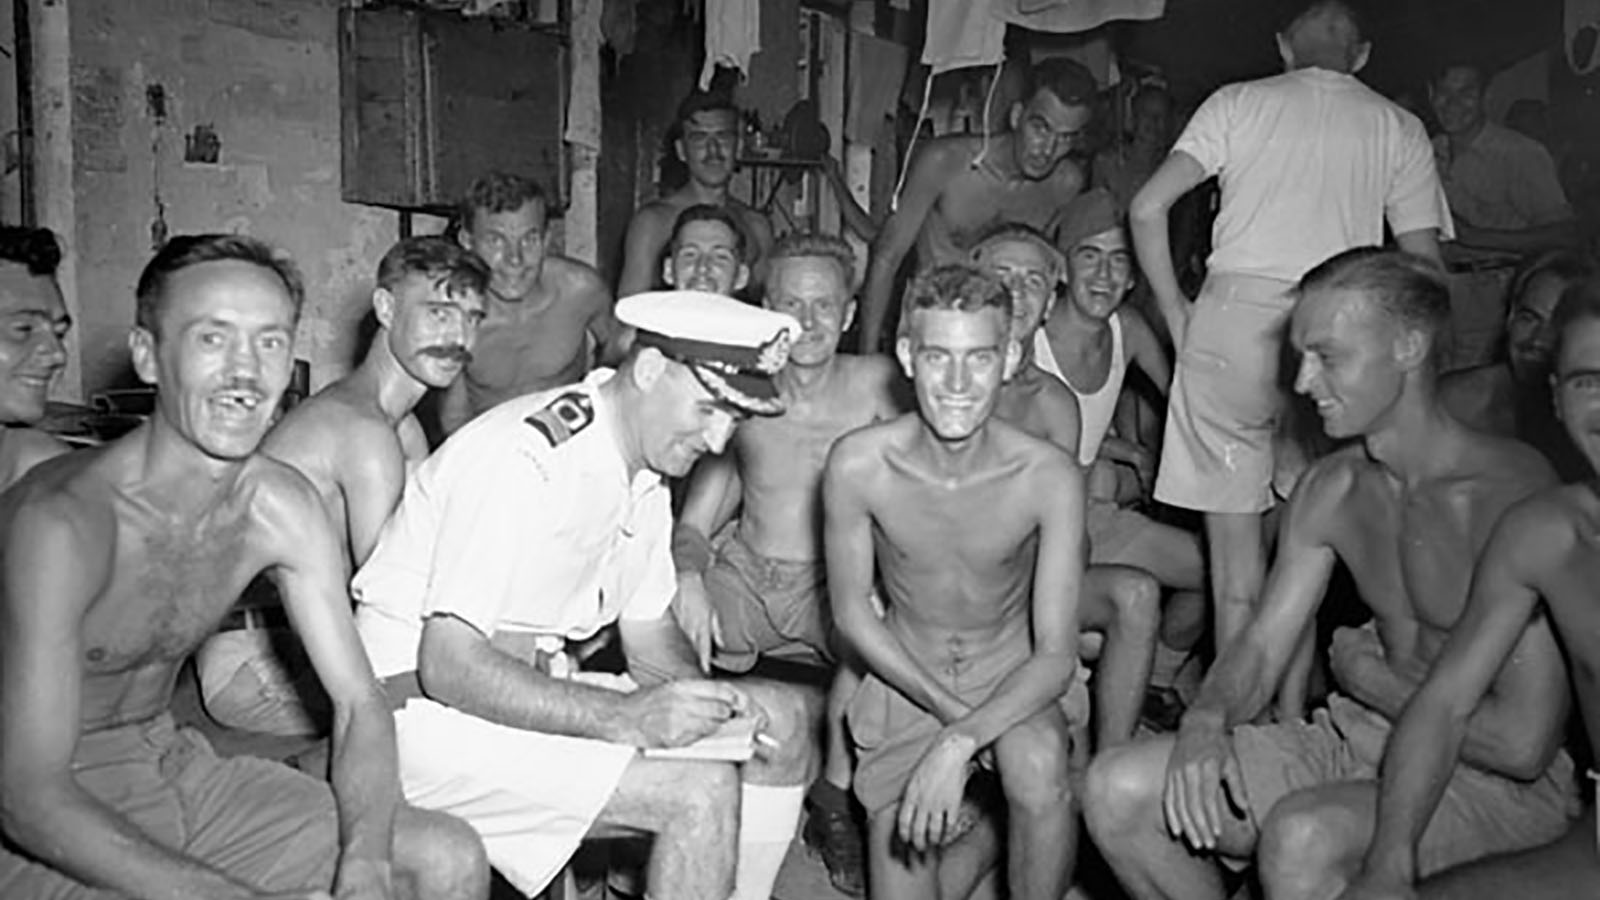 Canadian and British POWs